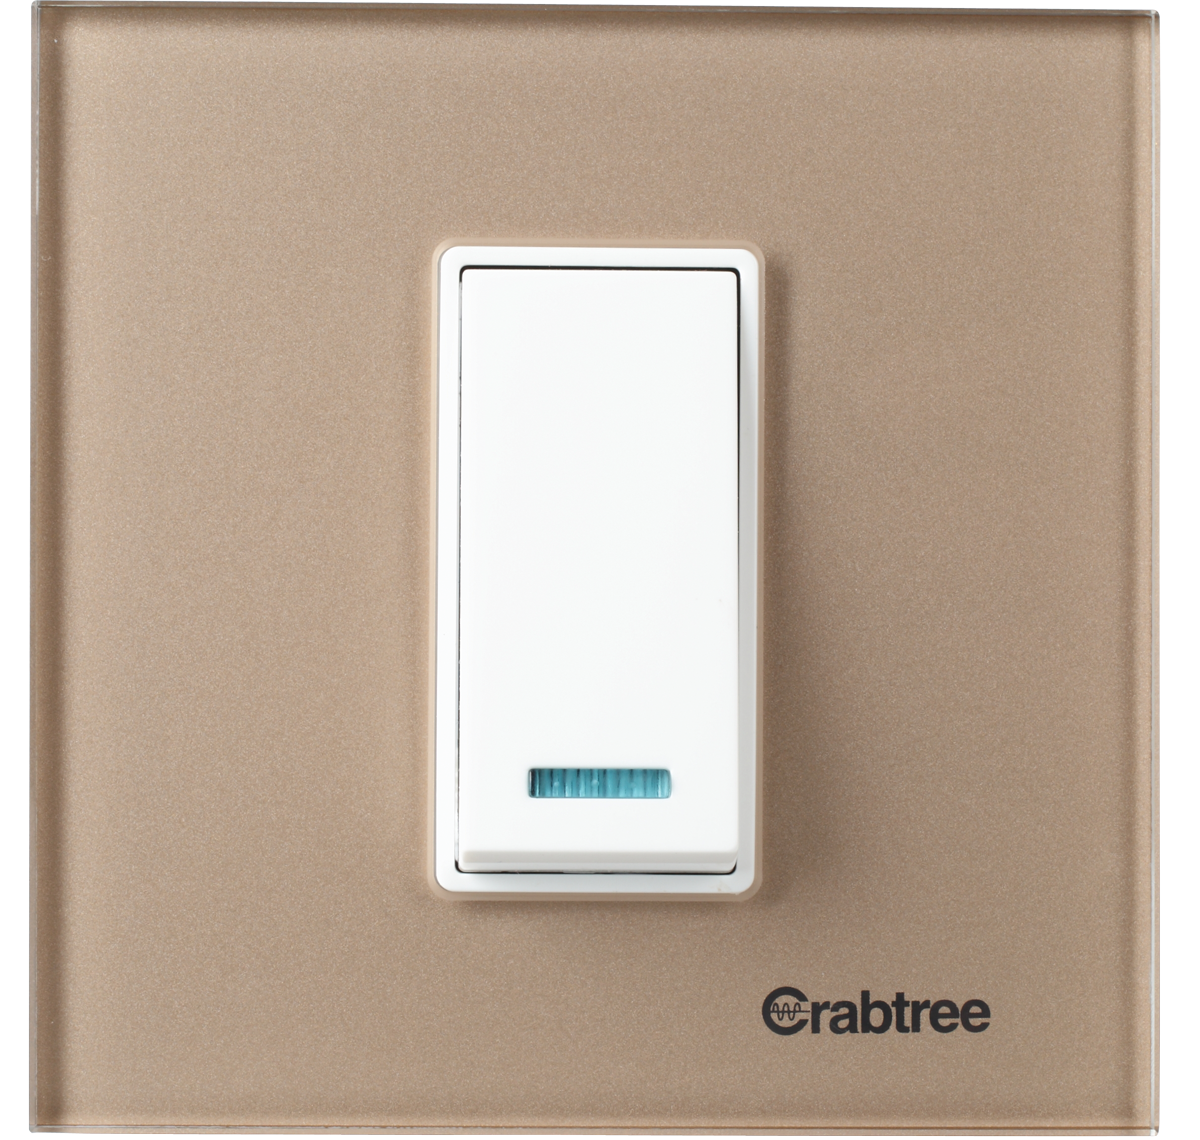 Crabtree - 1 M cover plate pearl white 